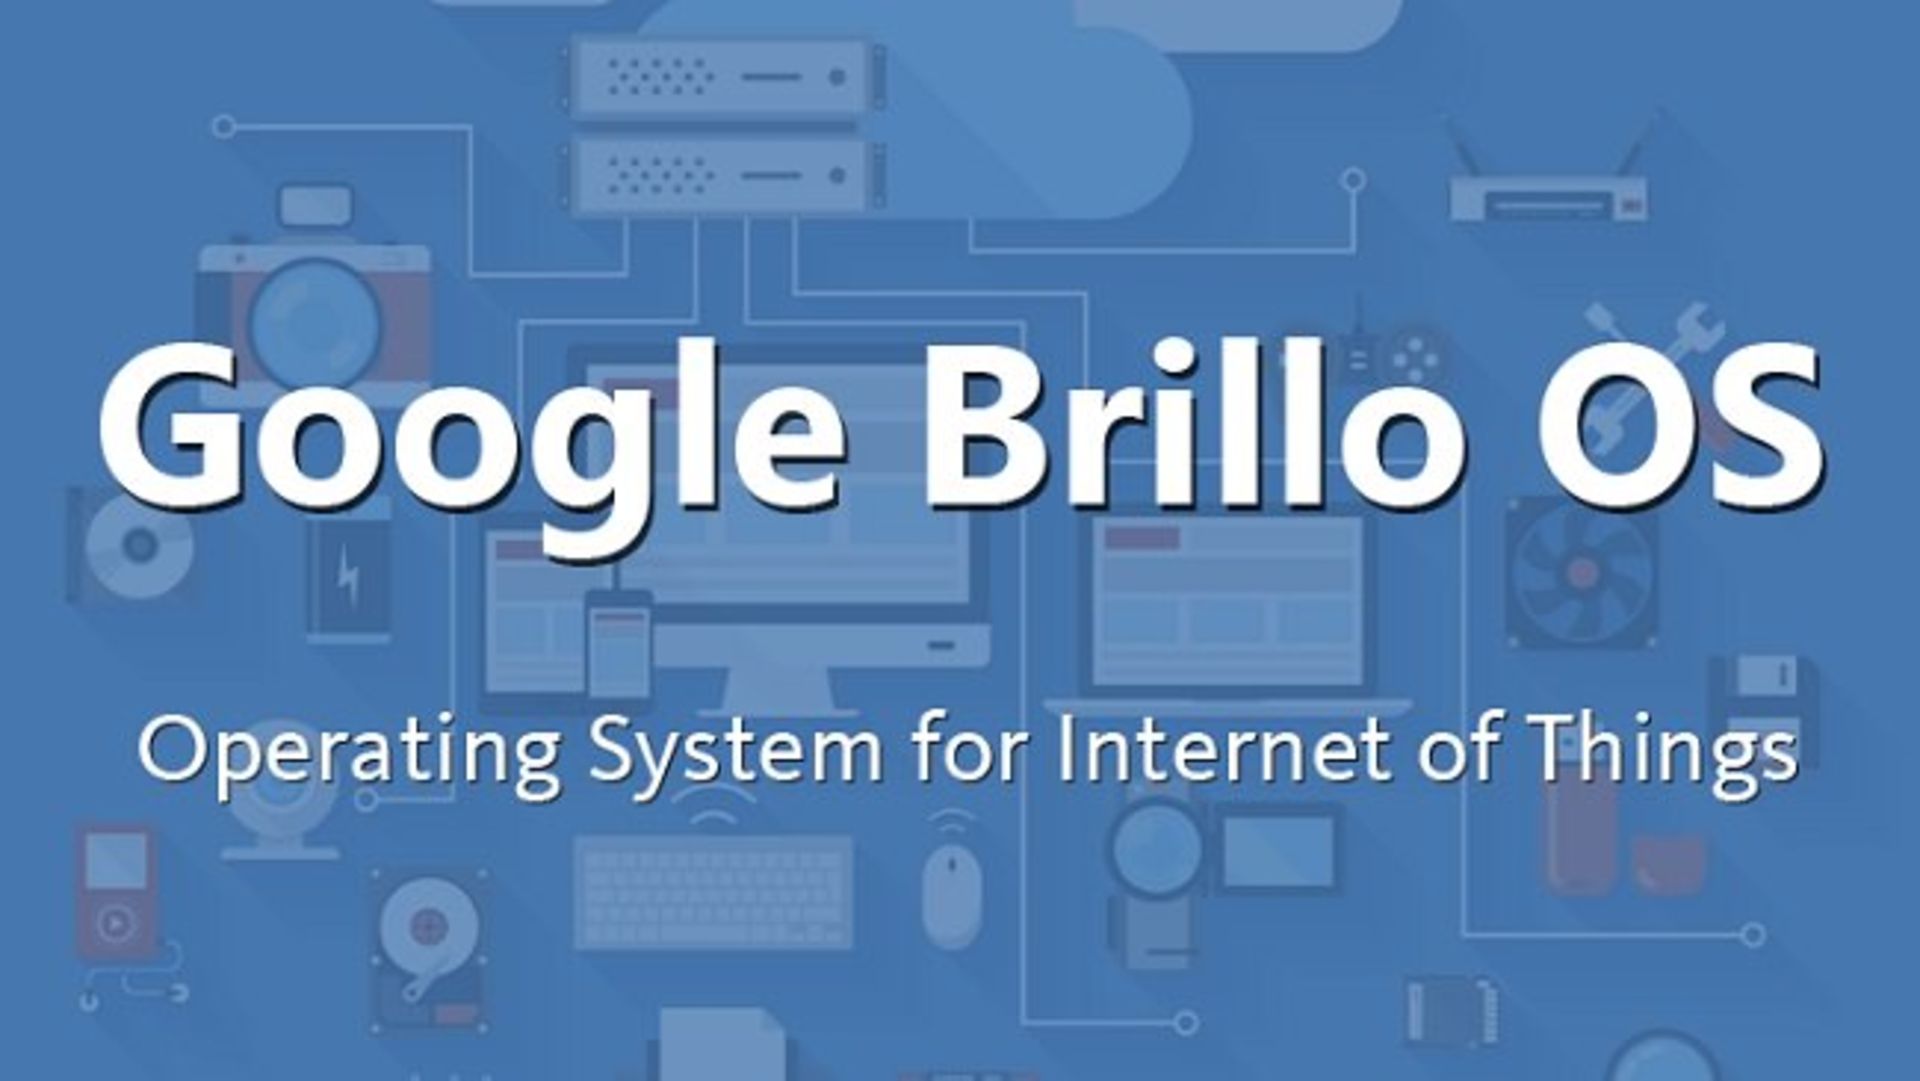 Google brillo operating system for internet of things